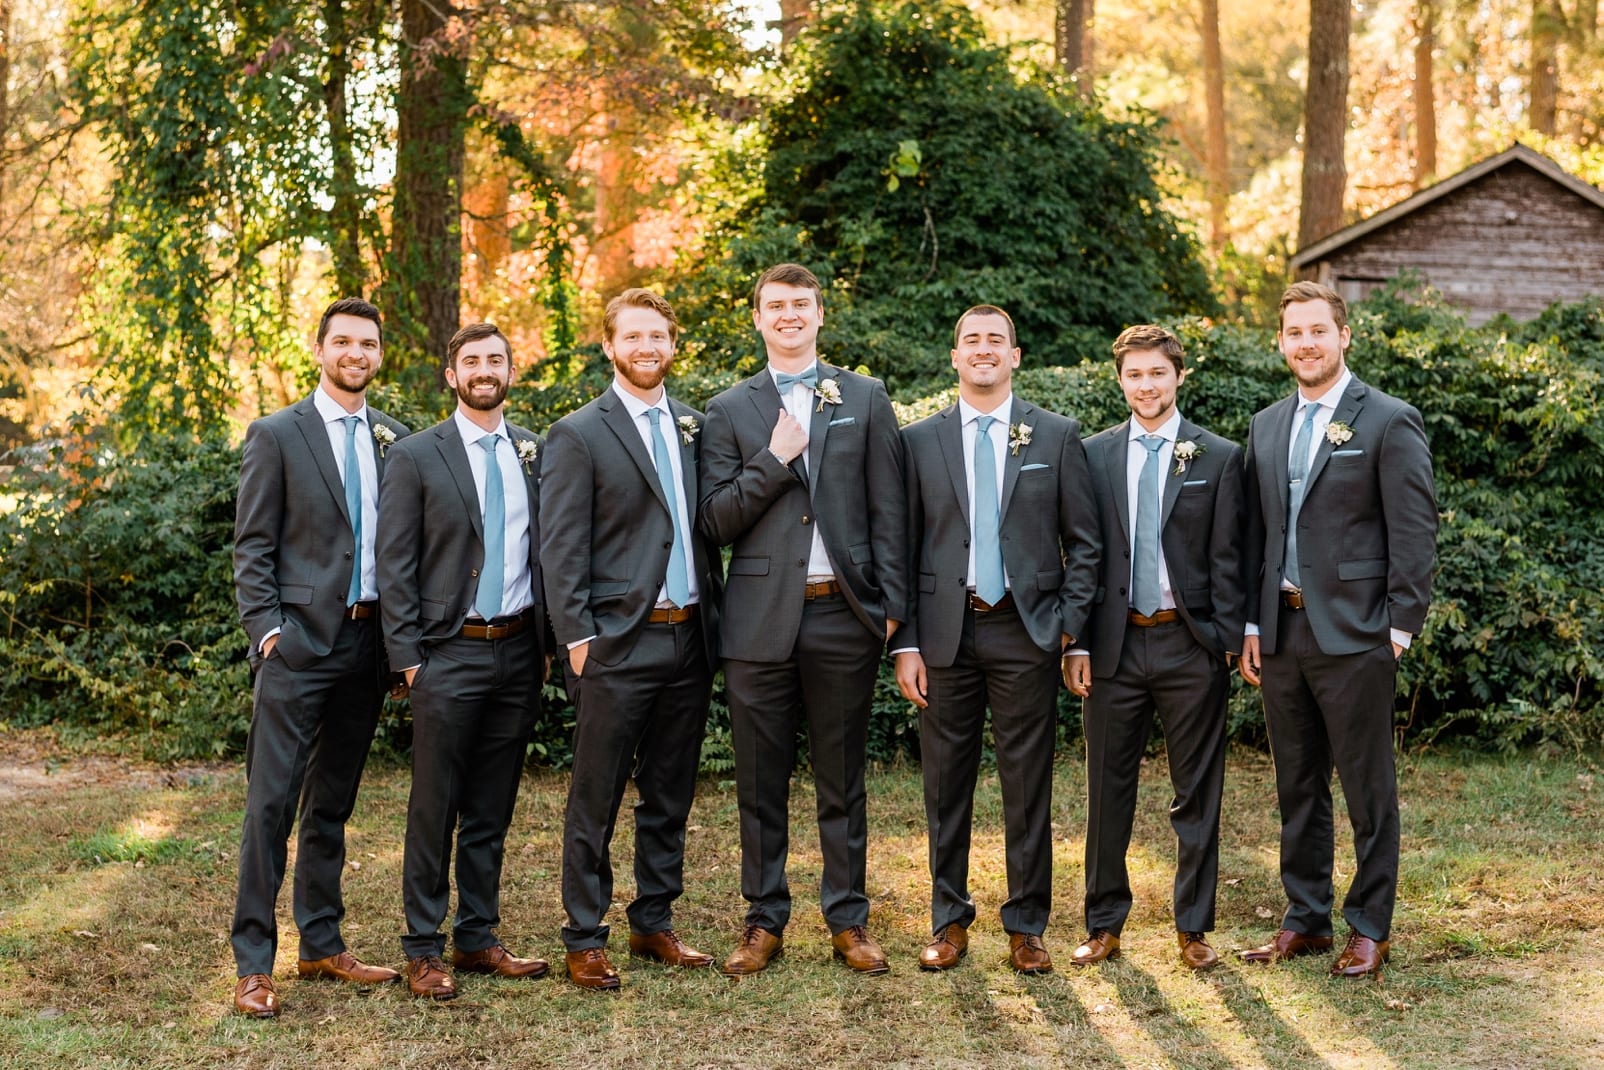 Oaks at Salem groom with his groomsmen in gray suits with dusty blue ties photo